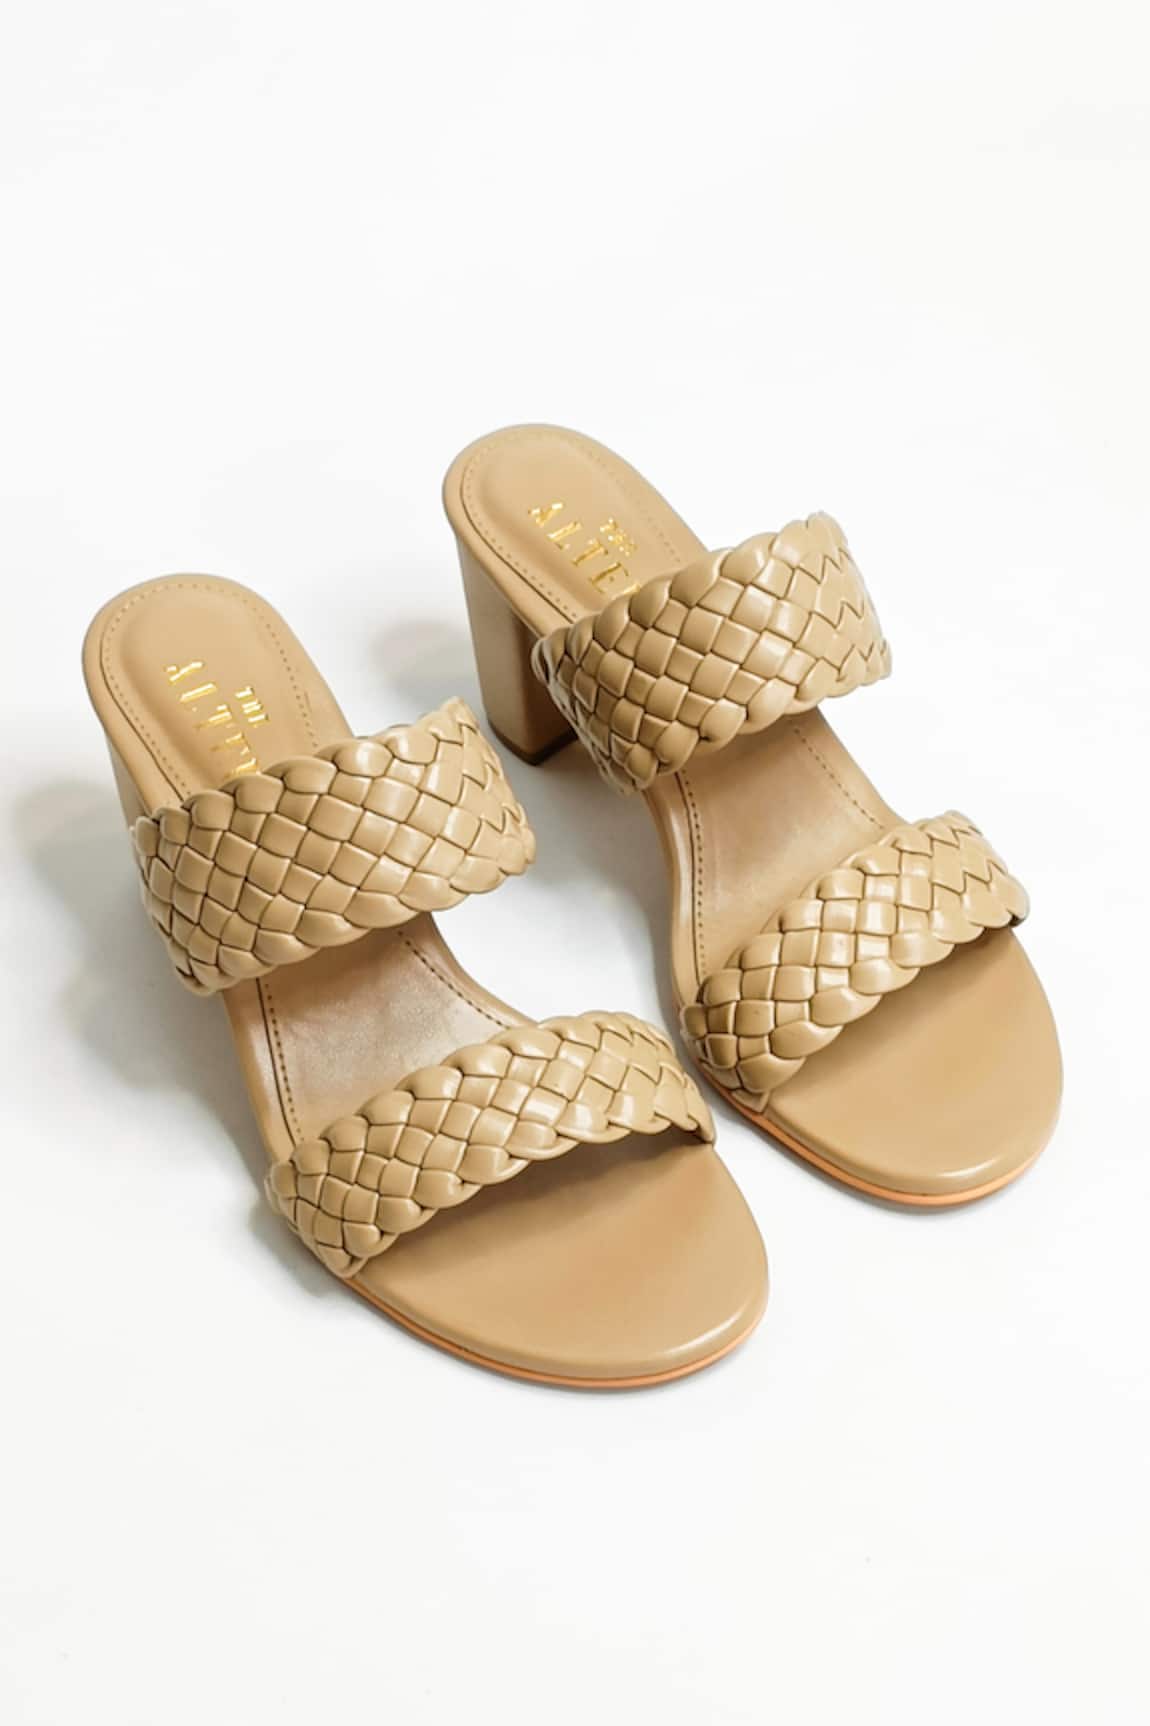 THE ALTER Braided Woven Block Heels